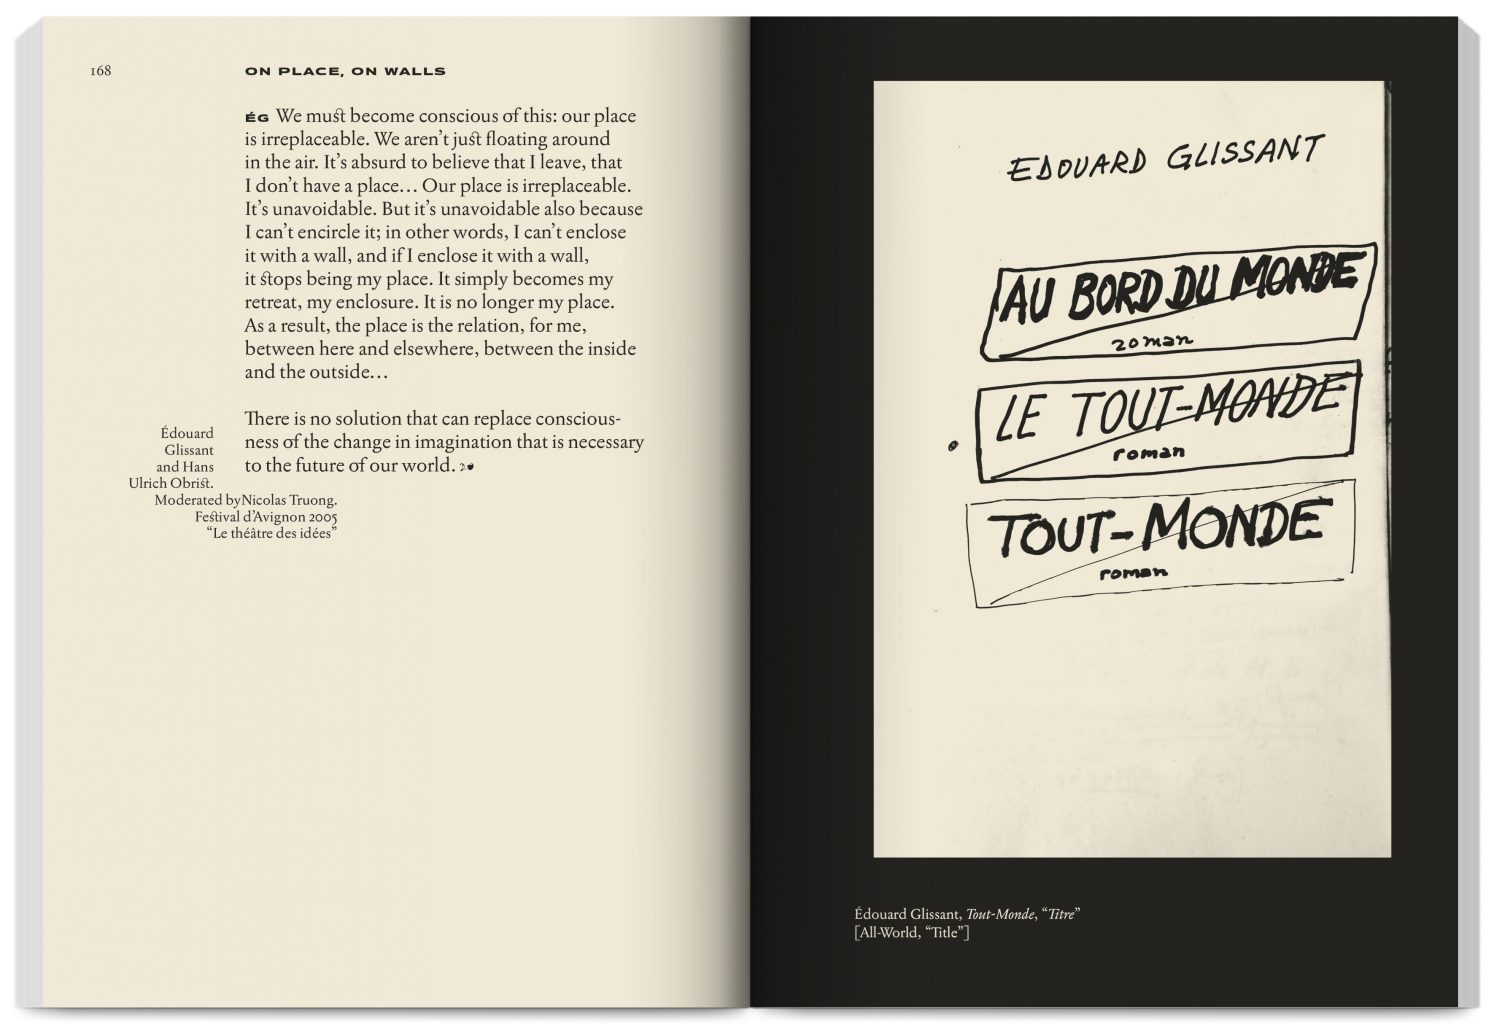 Publication Mondialité: or the archipelagos of Édouard Glissant edited by Hans Ulrich Obrist, Asad Raza, published by Villa Empain Fondation Boghossian, design by In the shade of a tree studio, founded by Sophie Demay and Maël Fournier Comte.